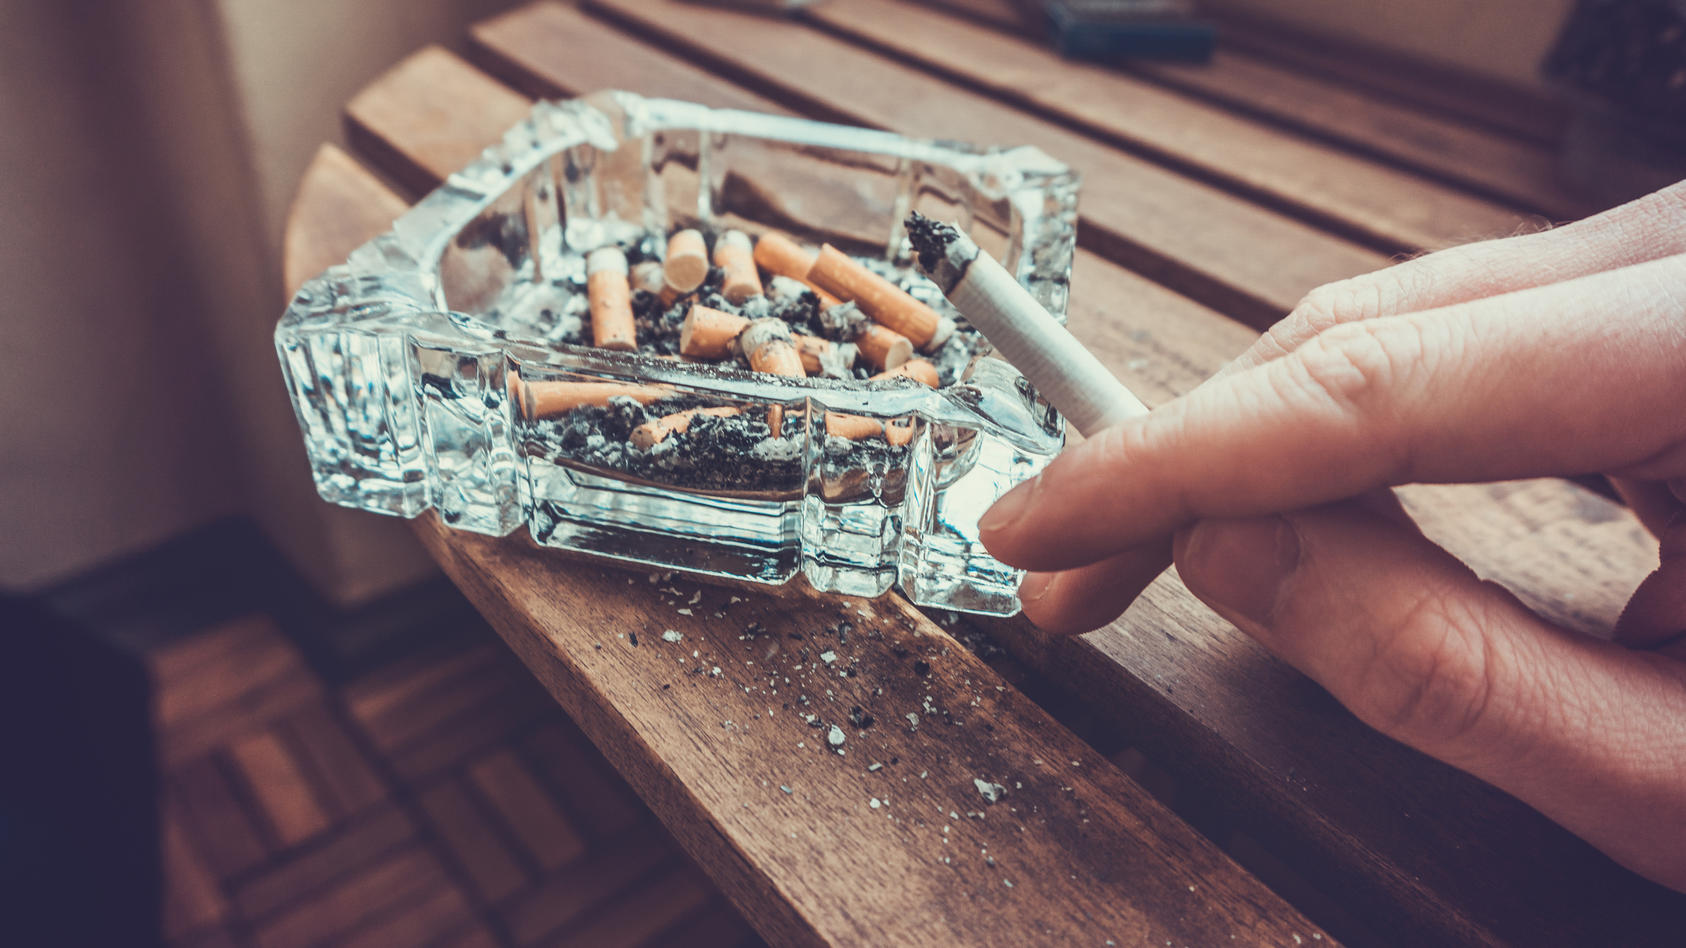 Man smoking a cigarette holding a burning filter tip in his hand alongside a glass ashtray full of ash and dead butts in a heavy smoker of addiction concept